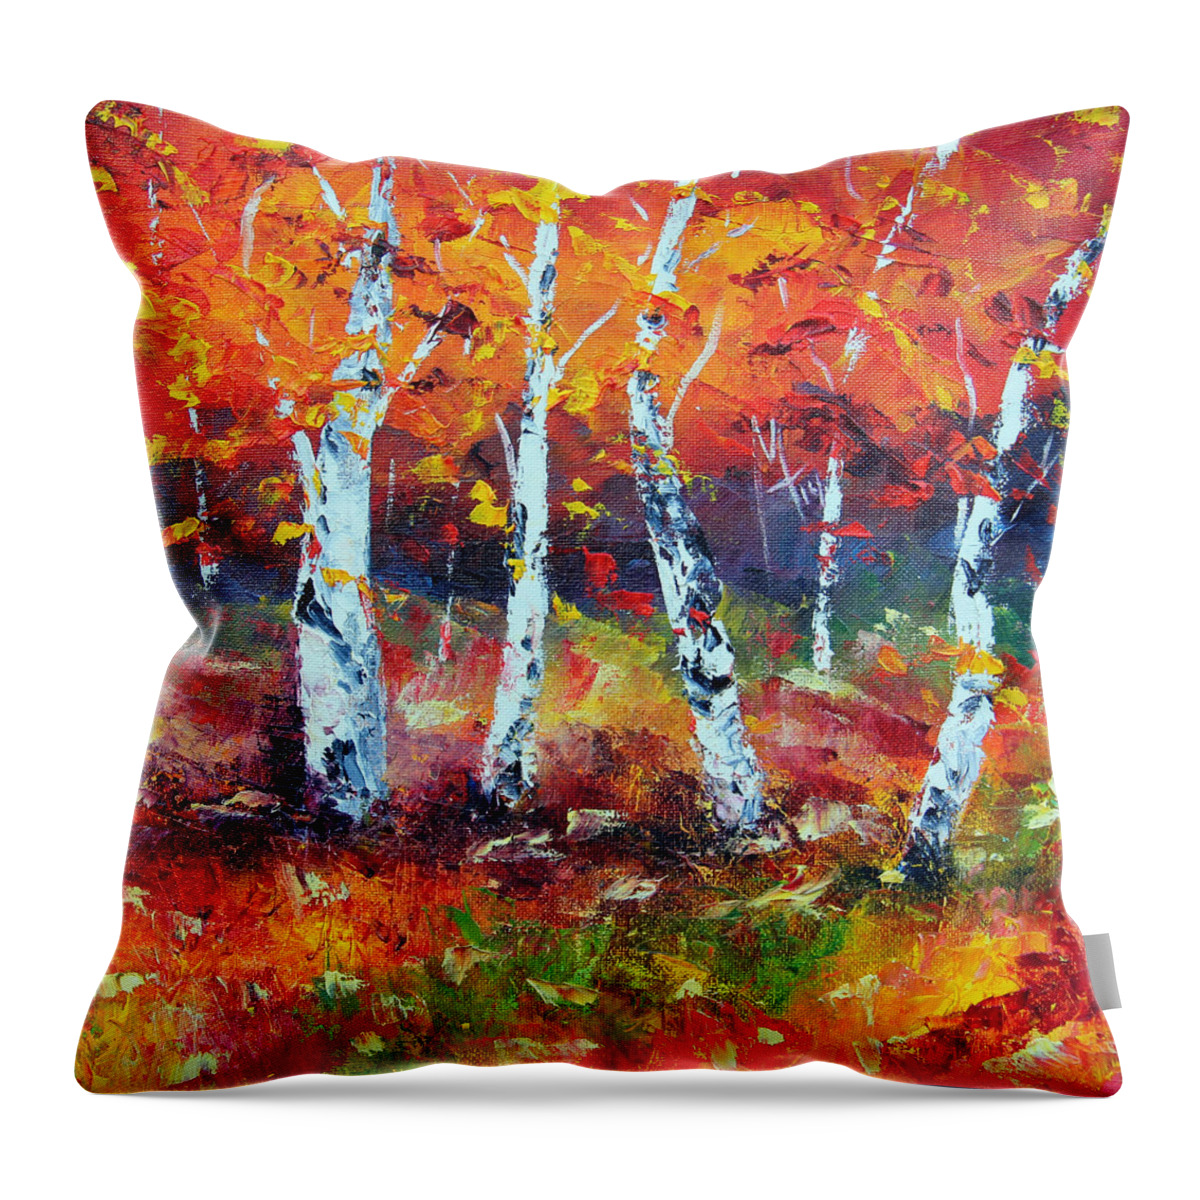 Autumn Throw Pillow featuring the painting Beautiful Demise by Meaghan Troup